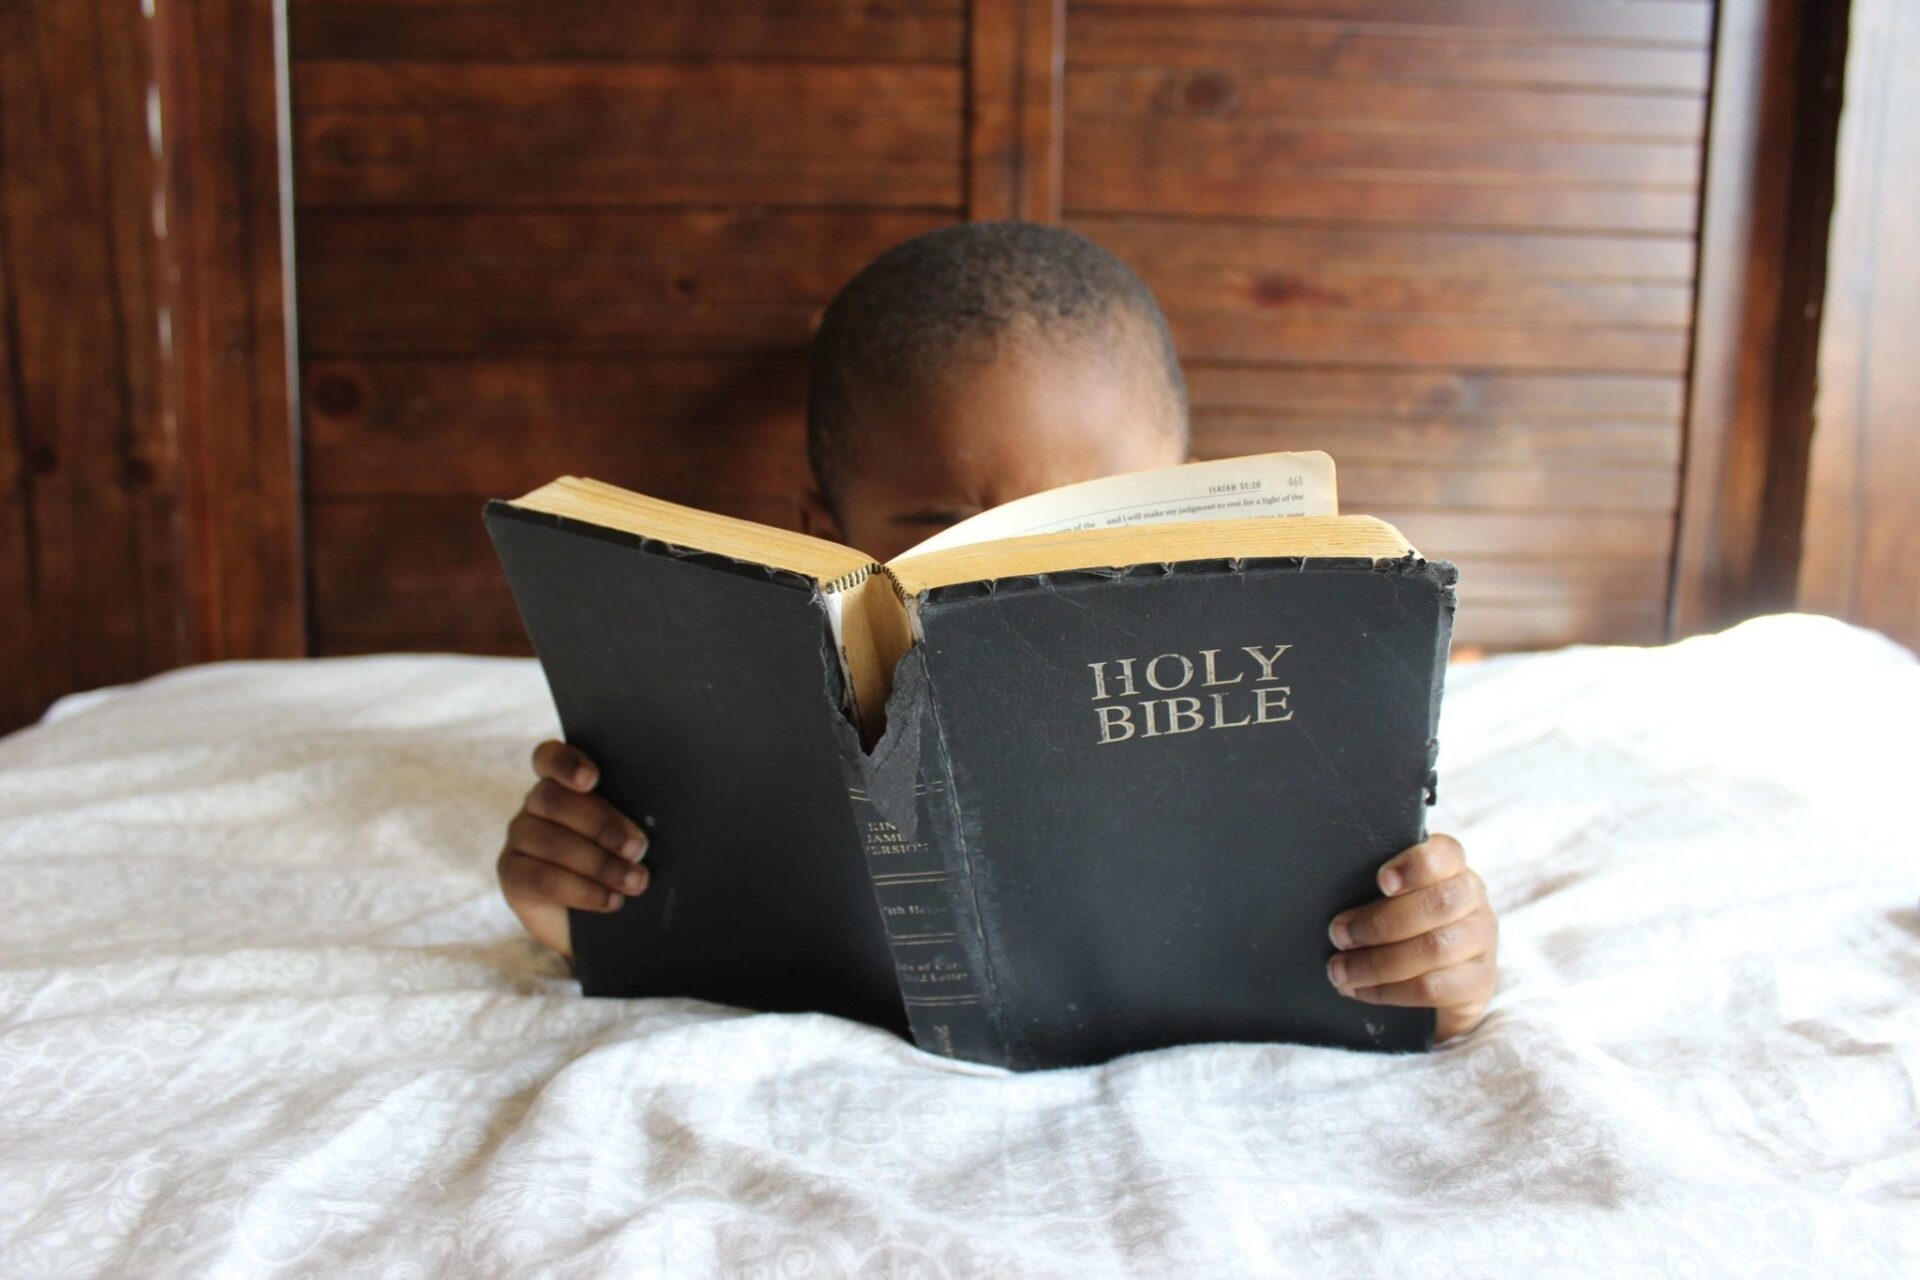 Children can know God's Word